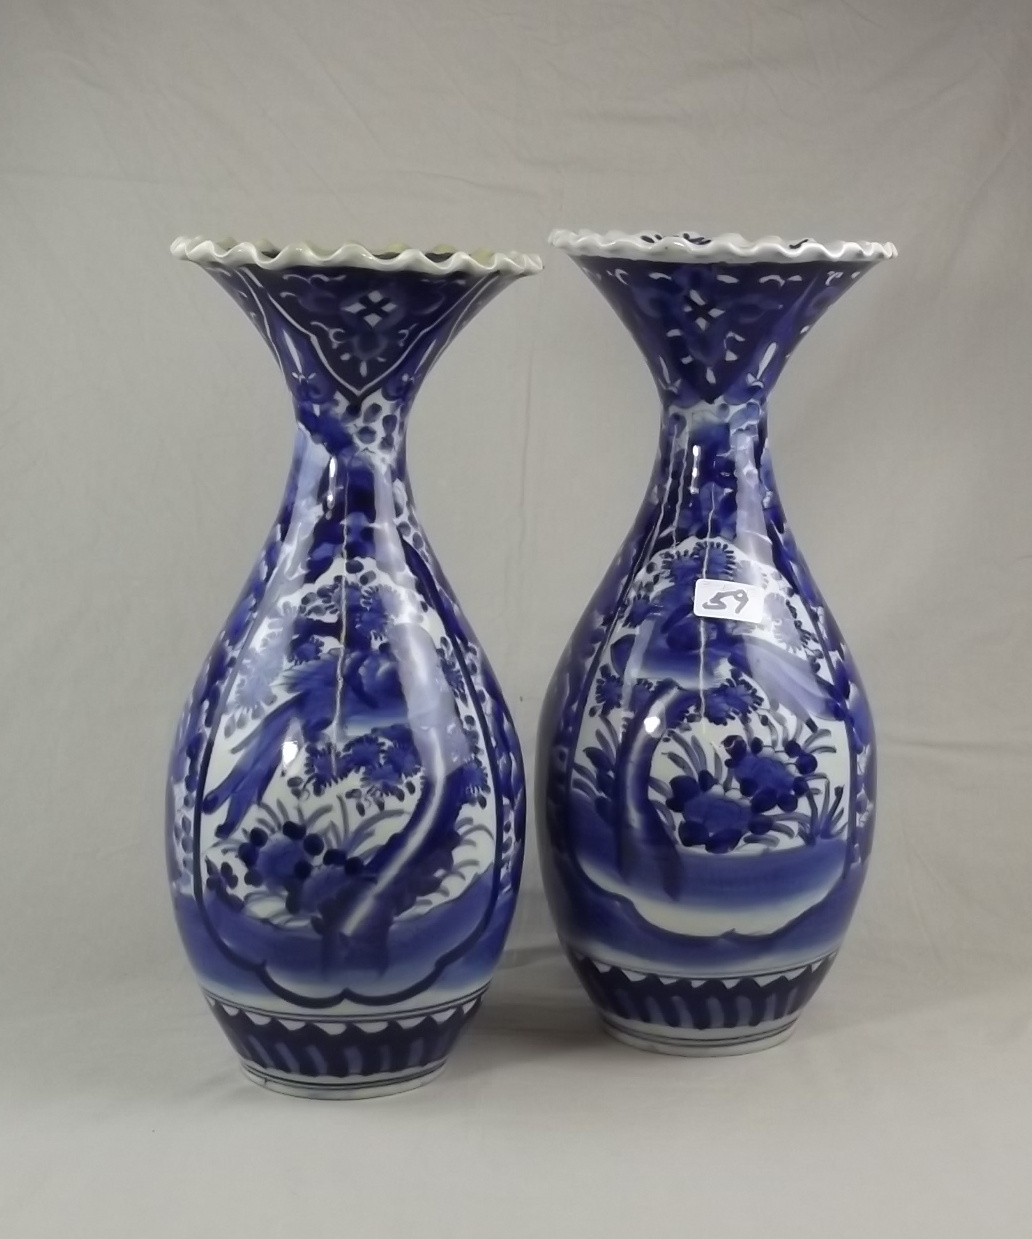 A Pair of 18" Blue & White Canton Vases, Early 20th Century